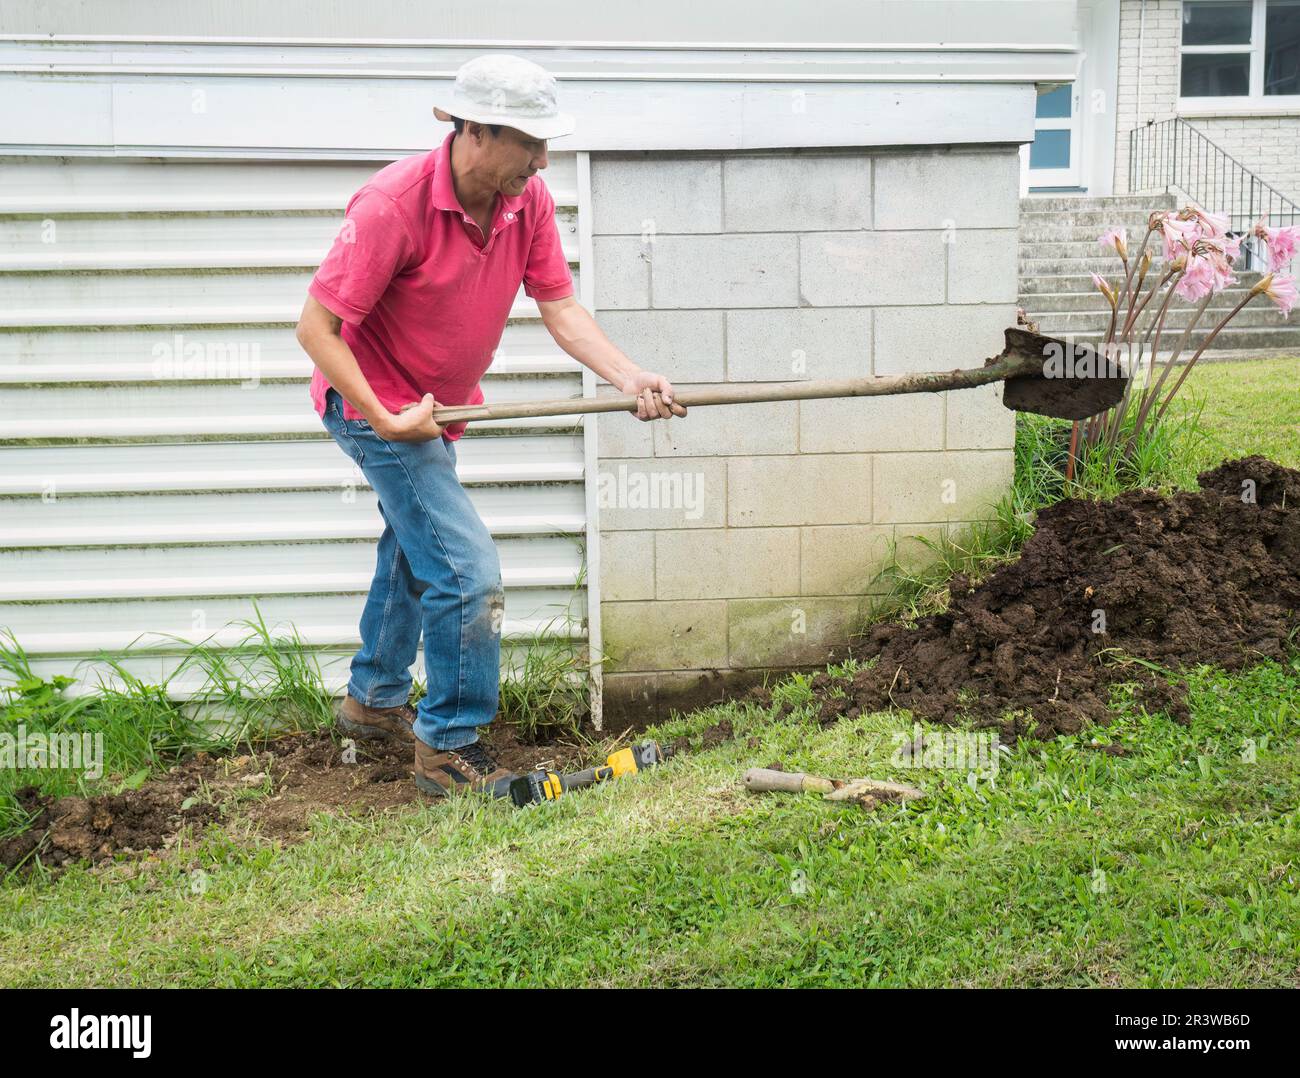 Man digging up soil using shovel on the side of garage wall, trying to exposure outside wall to find the leak into the garage. Stock Photo